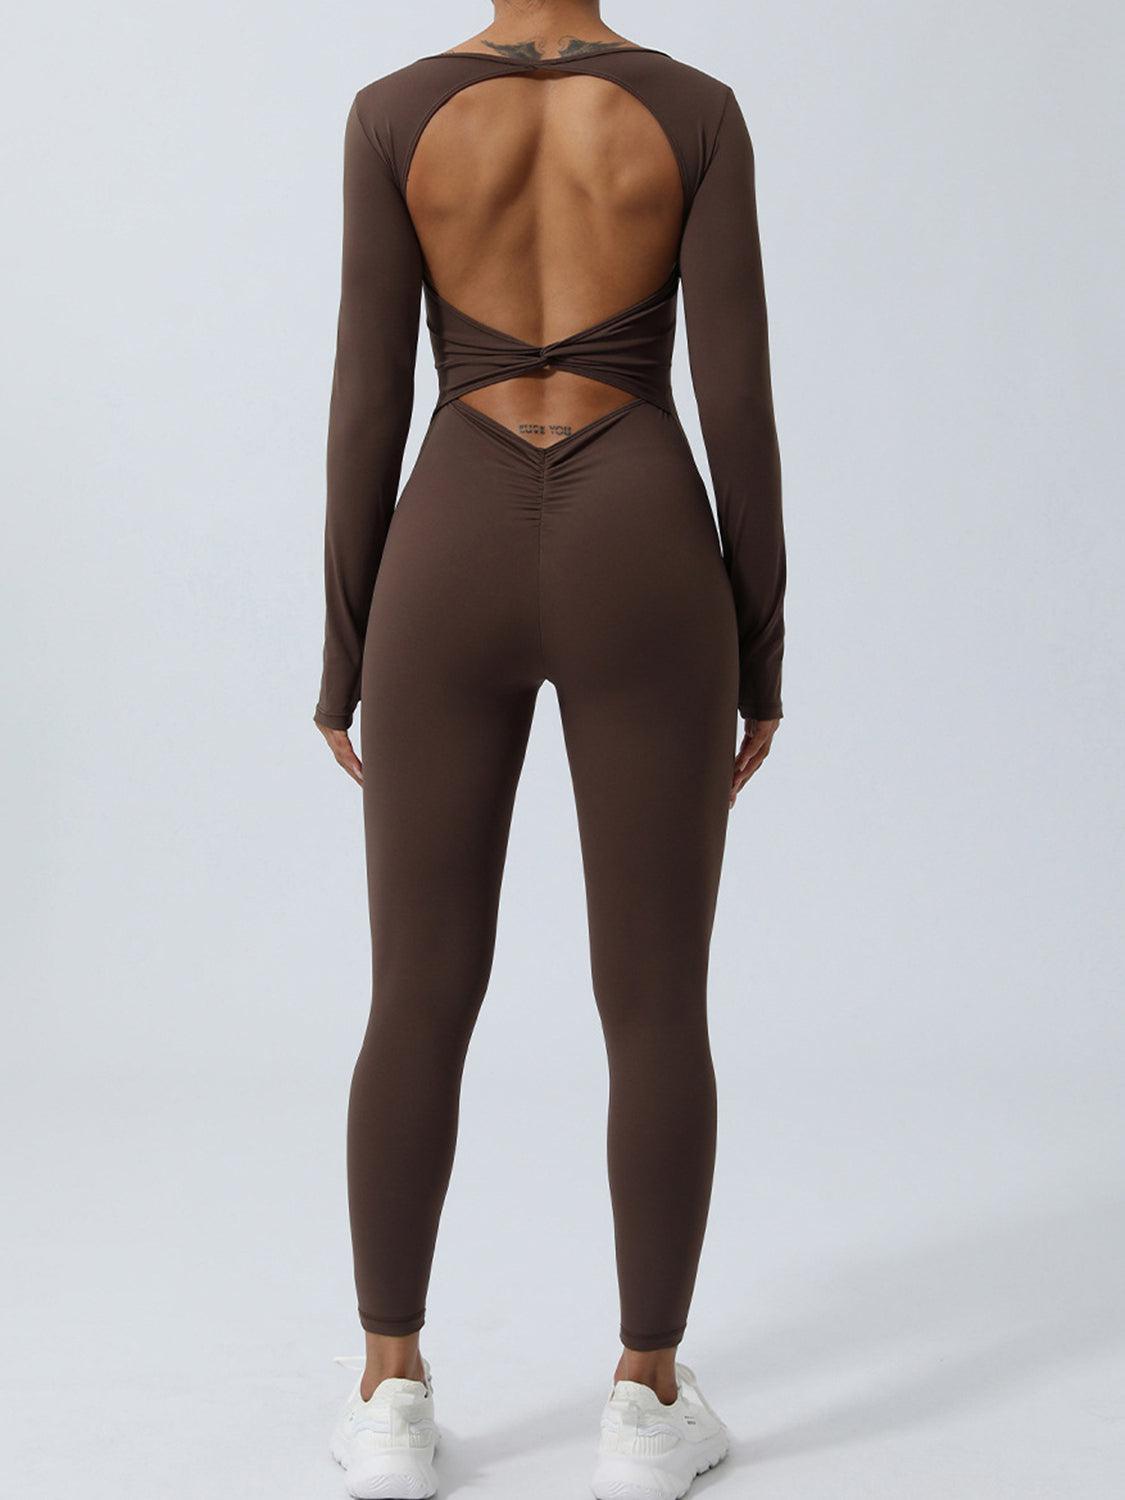 a woman in a brown bodysuit with a back cut out